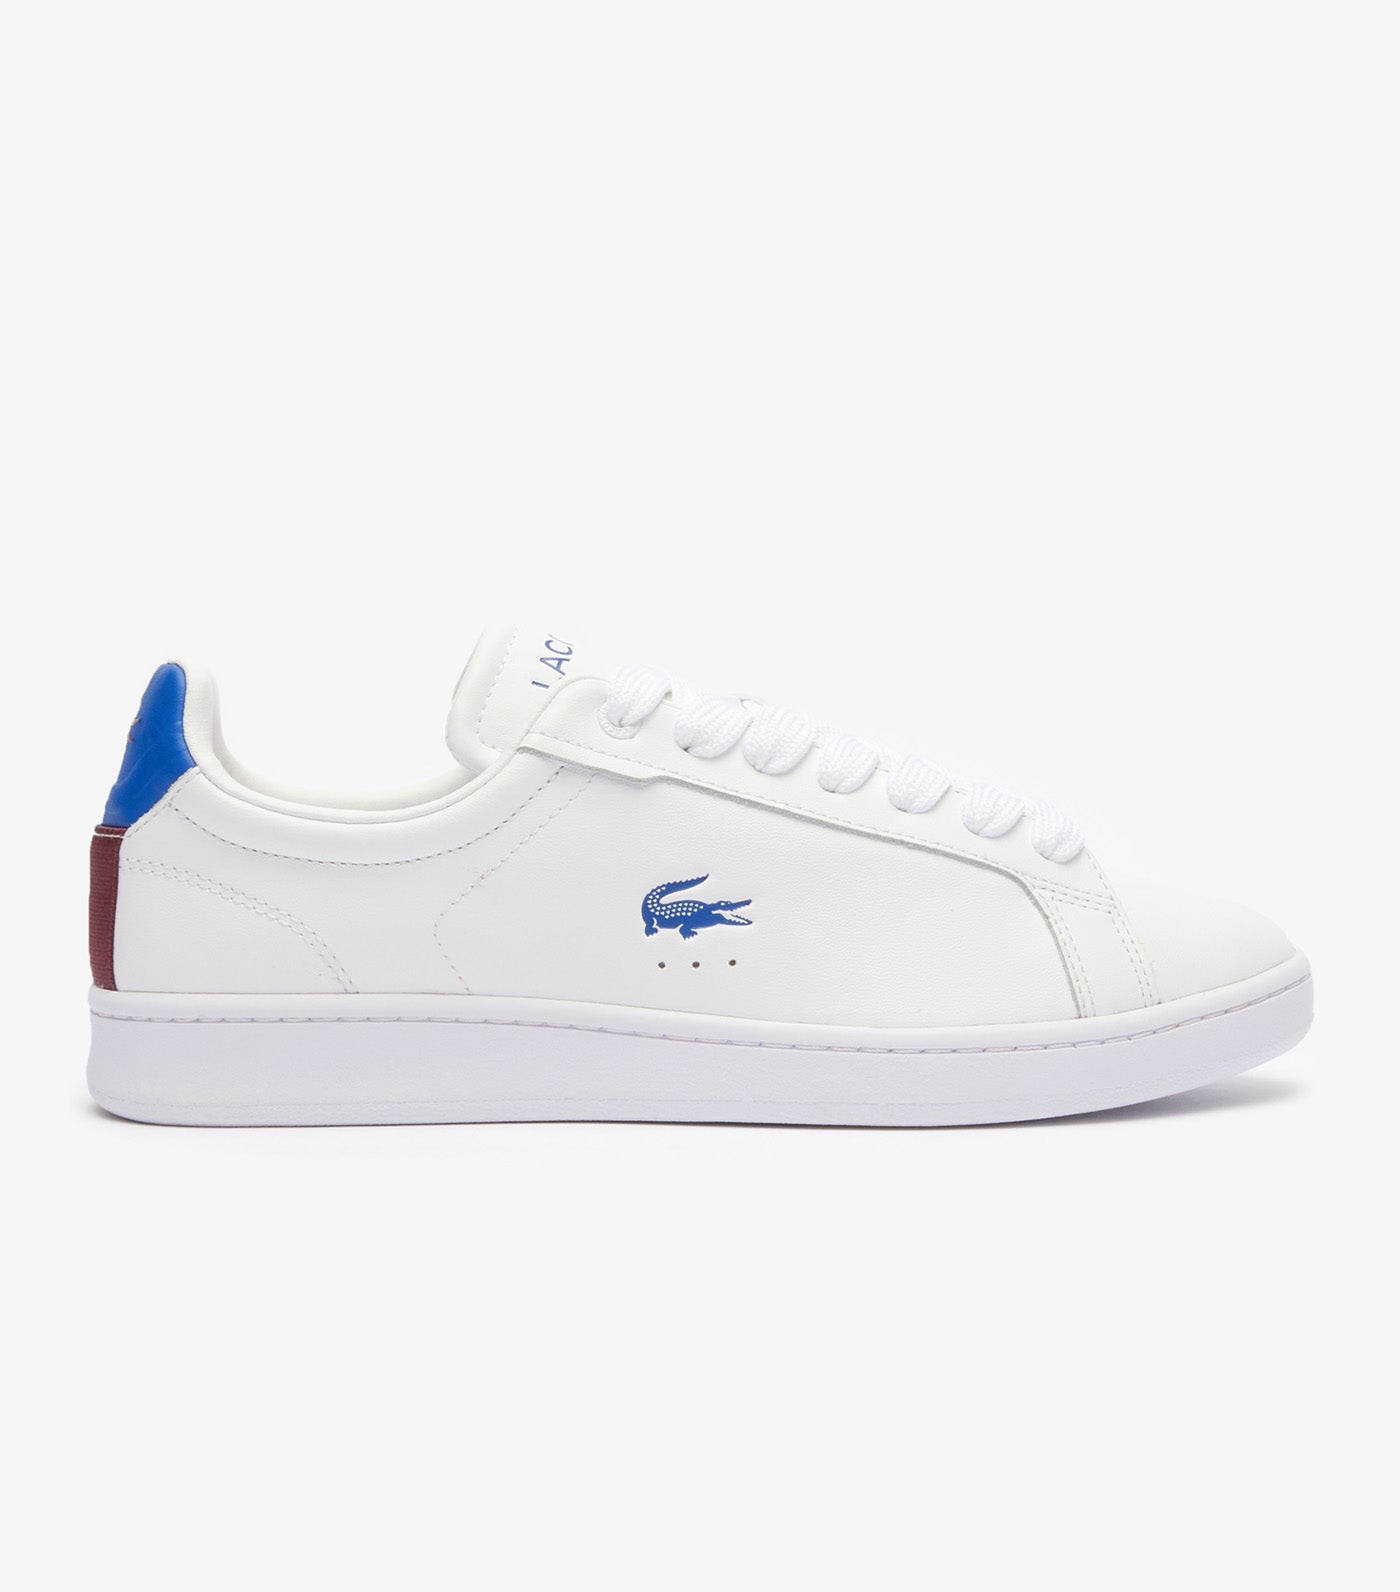 Men's Carnaby Pro Leather Trainers White/Blue